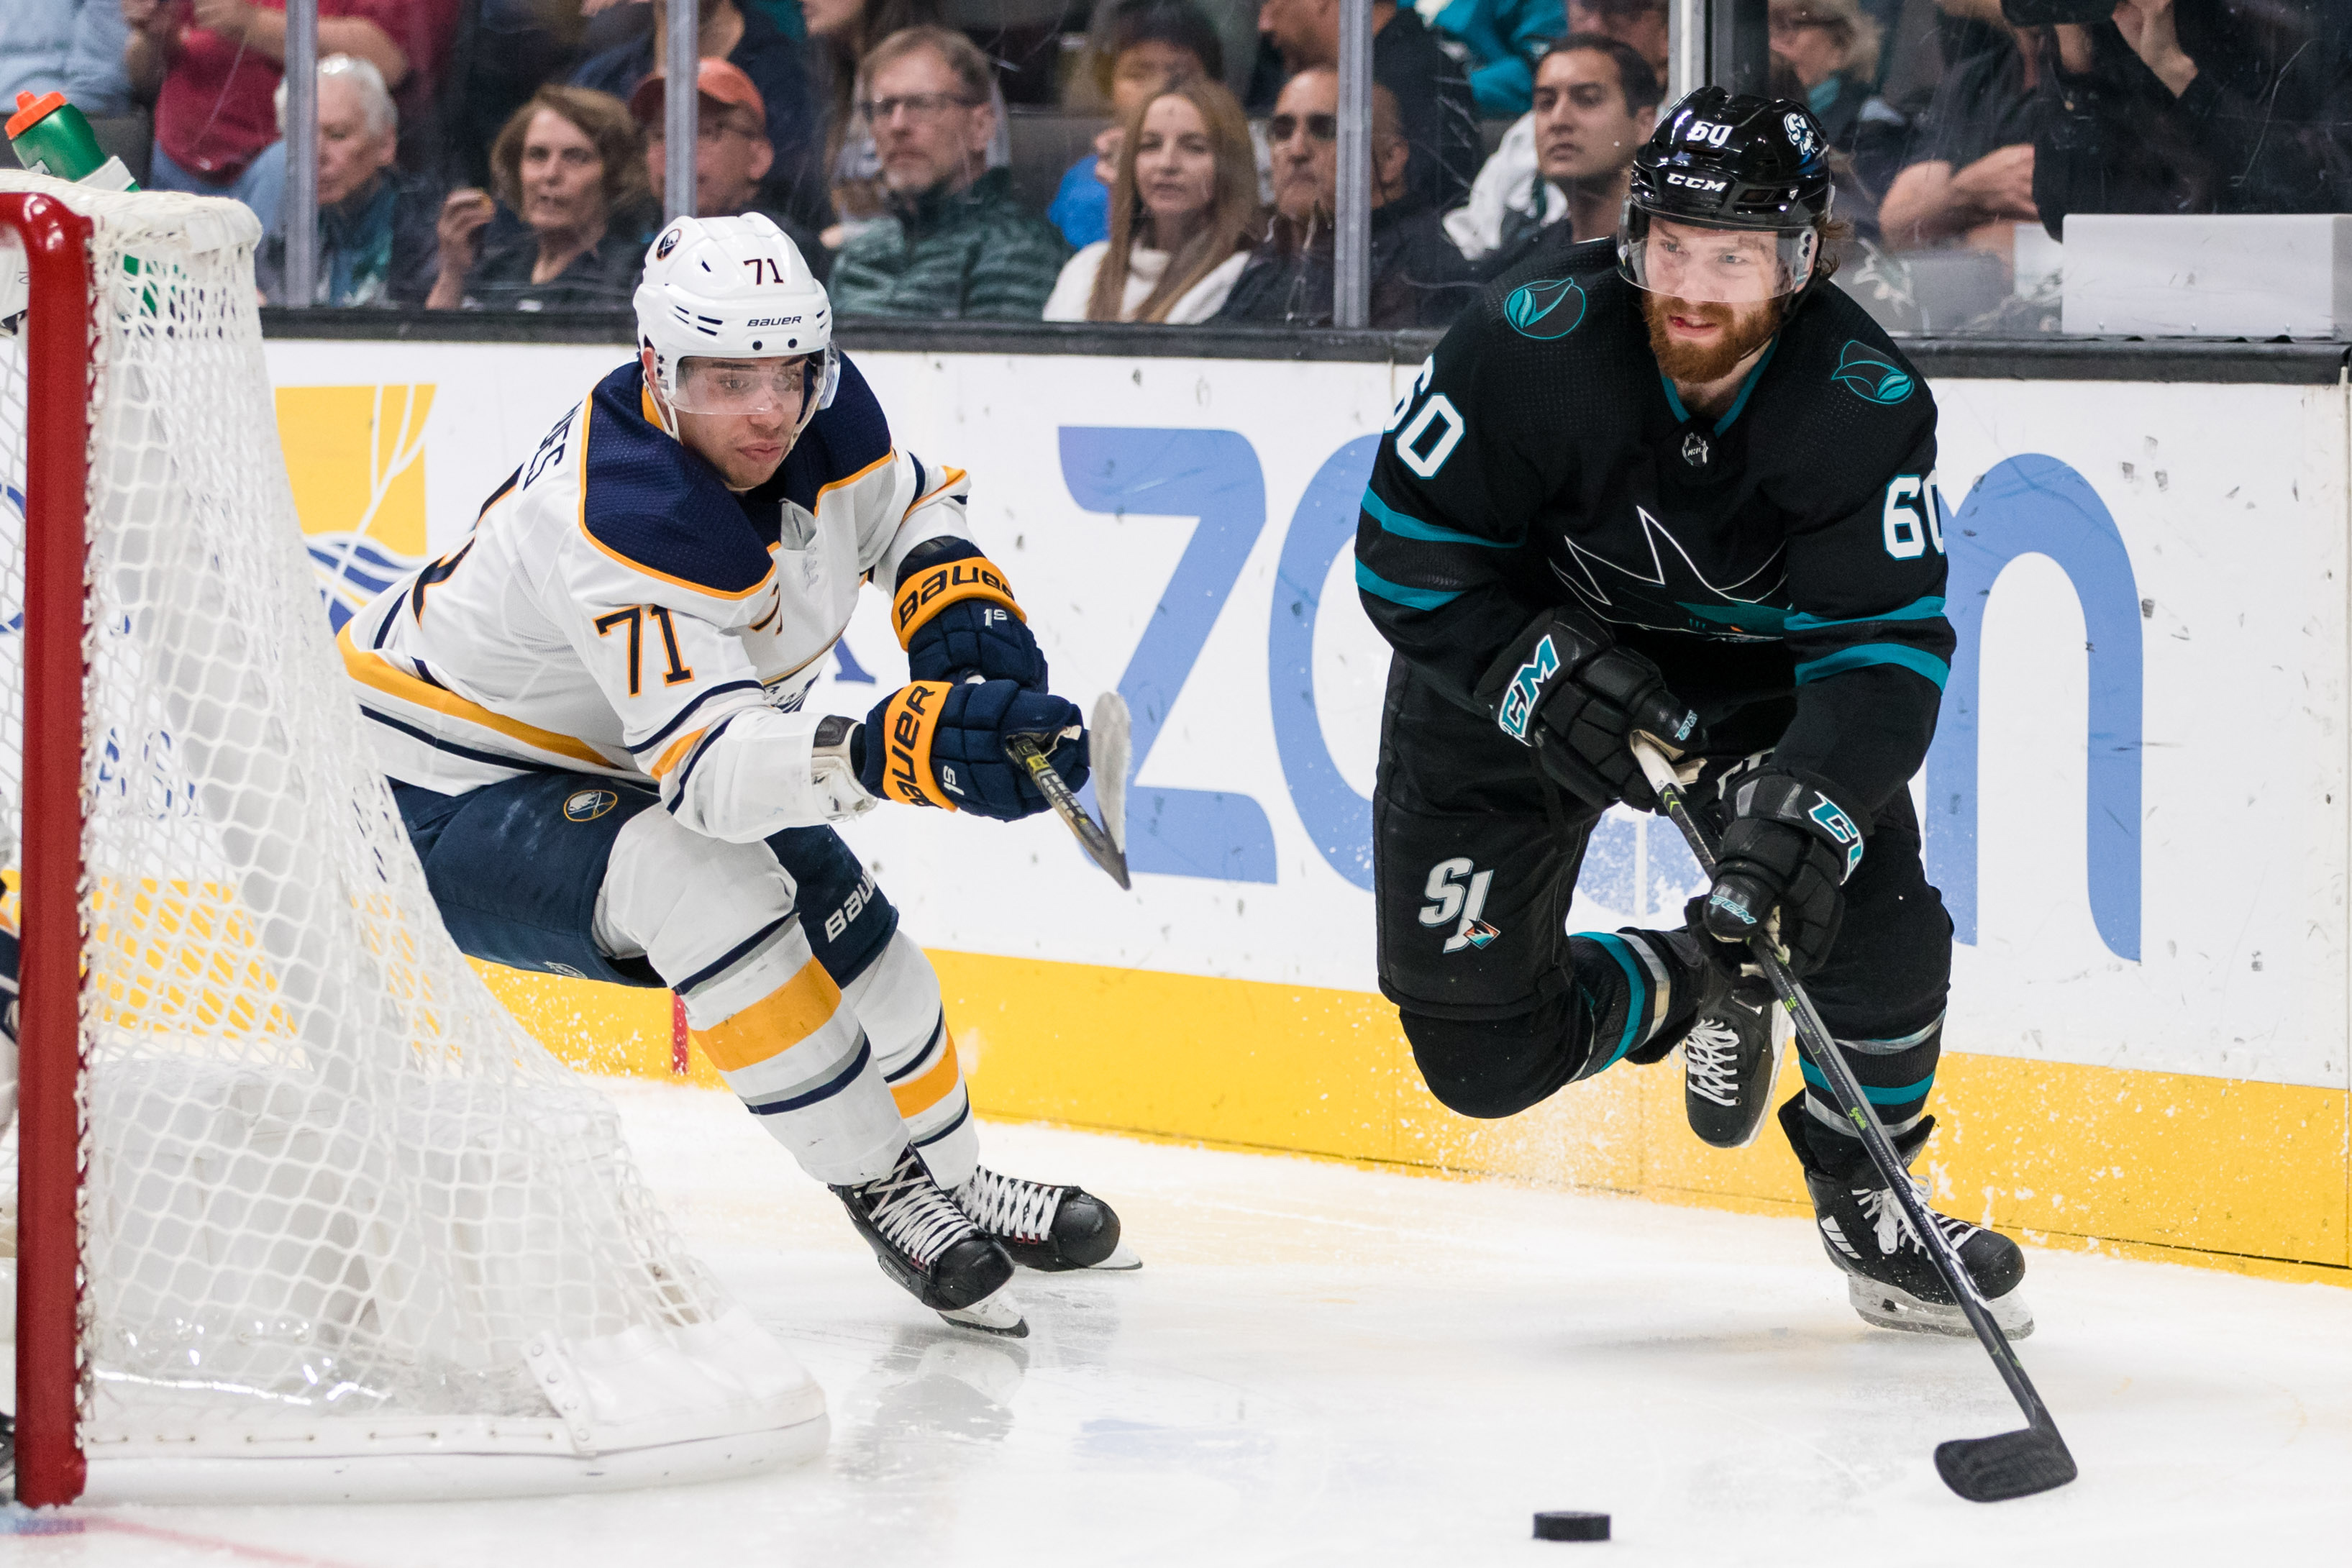 Oct 18, 2018; San Jose, CA, USA; San Jose Sharks center Rourke Chartier (60) passes as Buffalo Sabres left wing Evan Rodrigues (71) defends in the second period at SAP Center at San Jose.